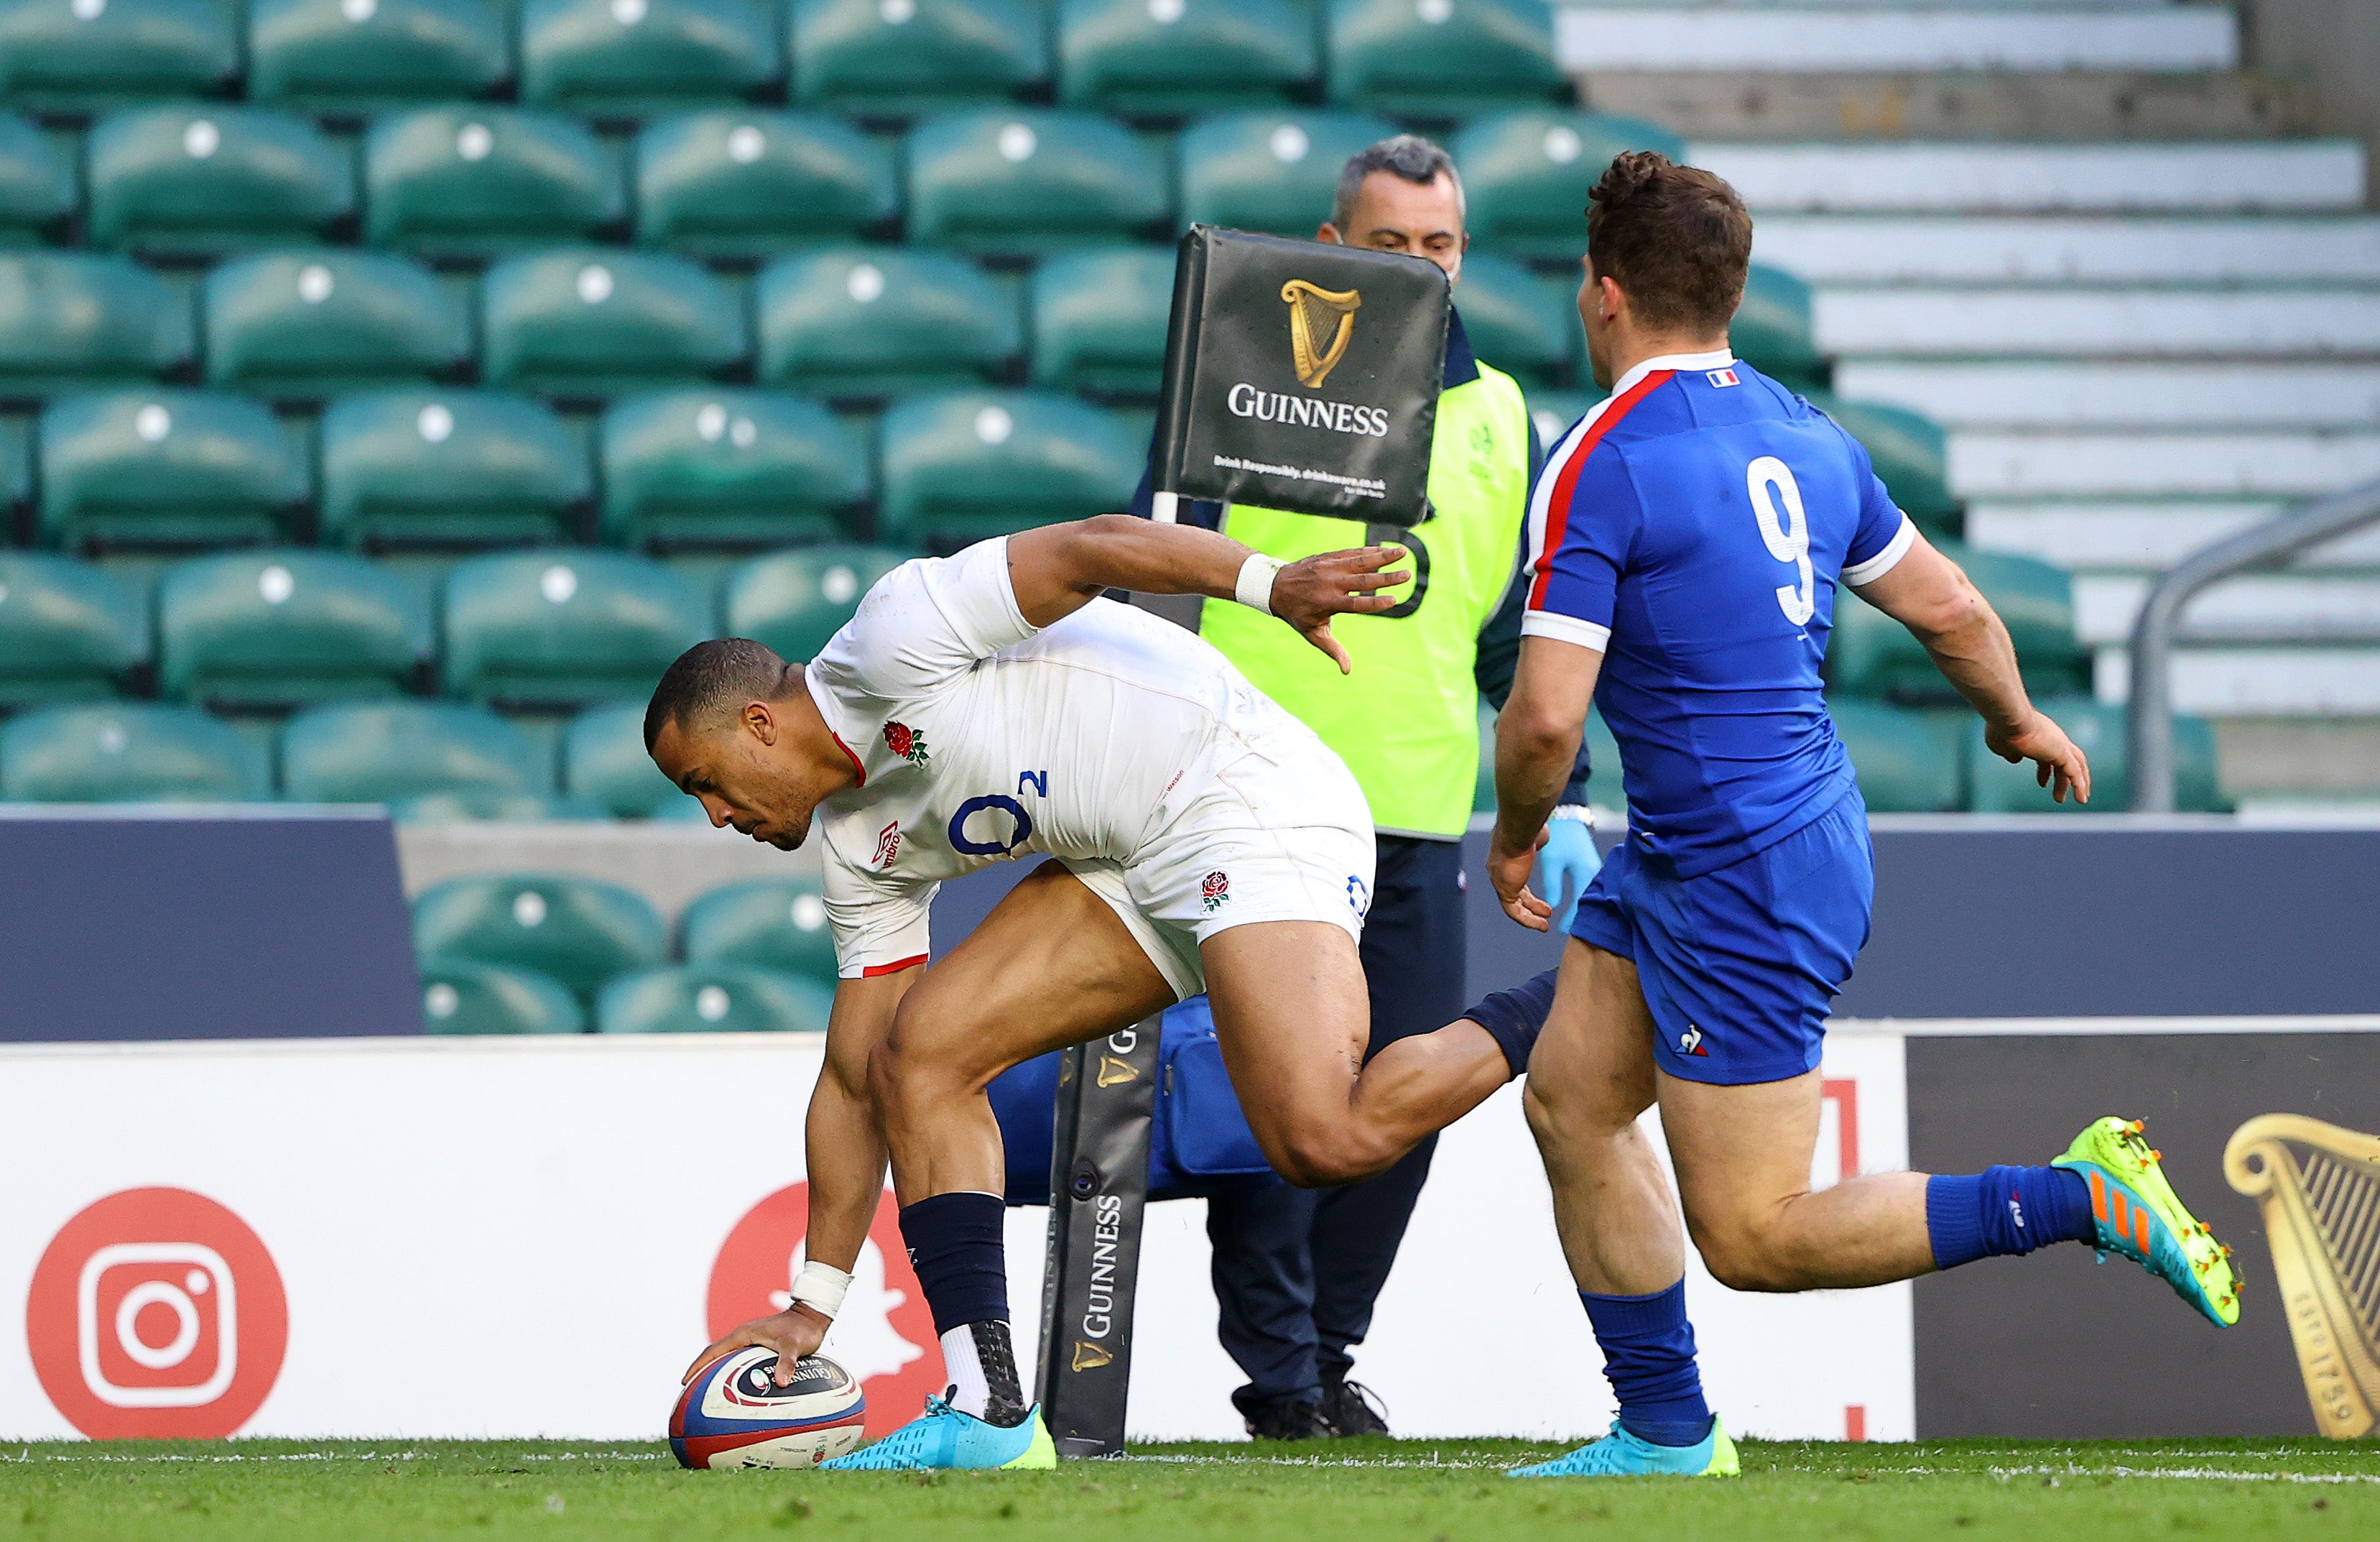 Anthony Watson scores England’s opening try